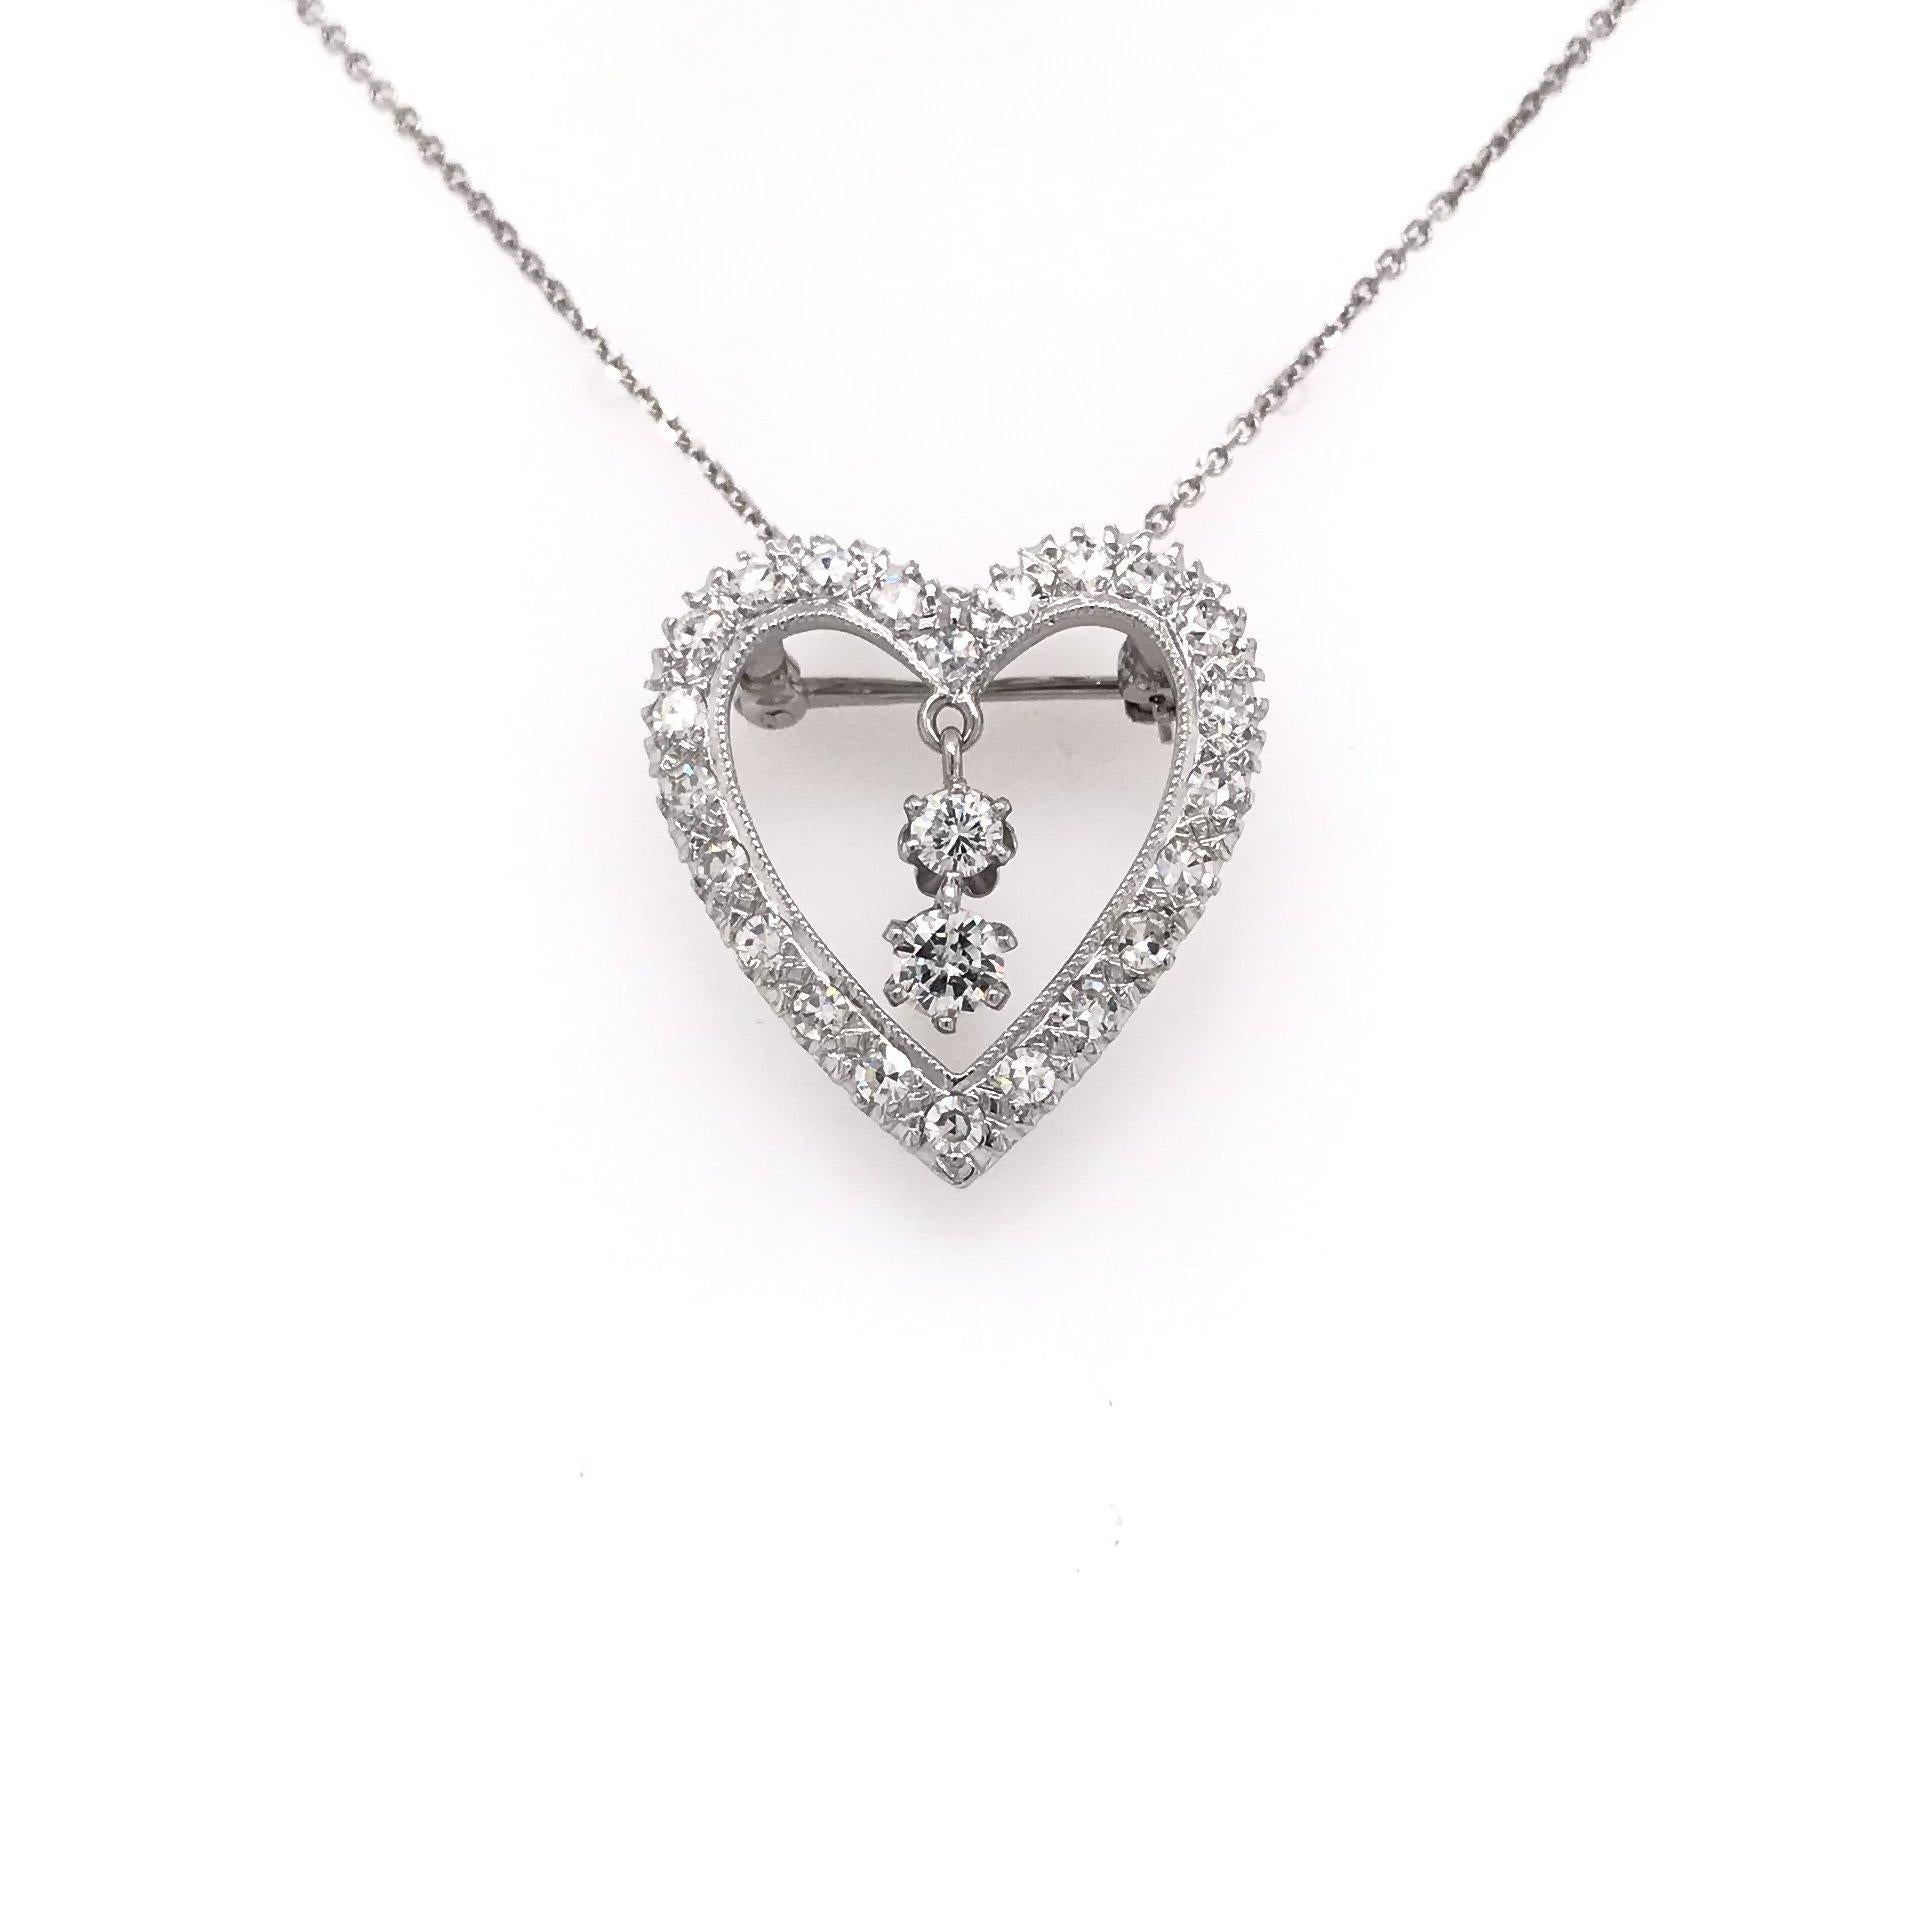 This gorgeous diamond heart pendant was crafted sometime during the Retro design period ( 1940-1960 ). The setting of the pendant is platinum and it can be worn as a pendant or a brooch. The pendant features 25 sparkling round diamonds as well as